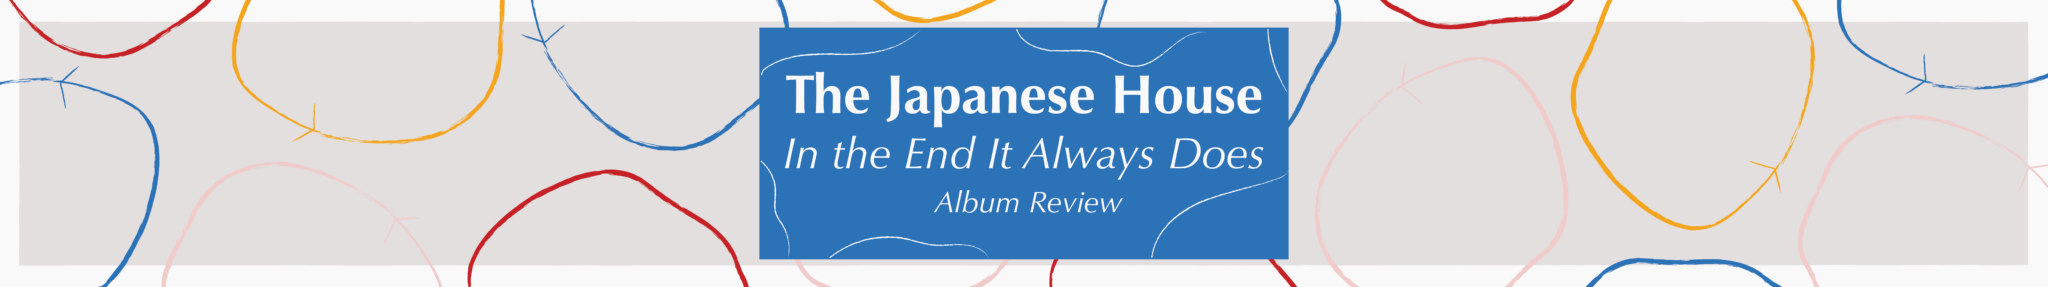 Album Review: The Japanese House - "In The End It Always Does"